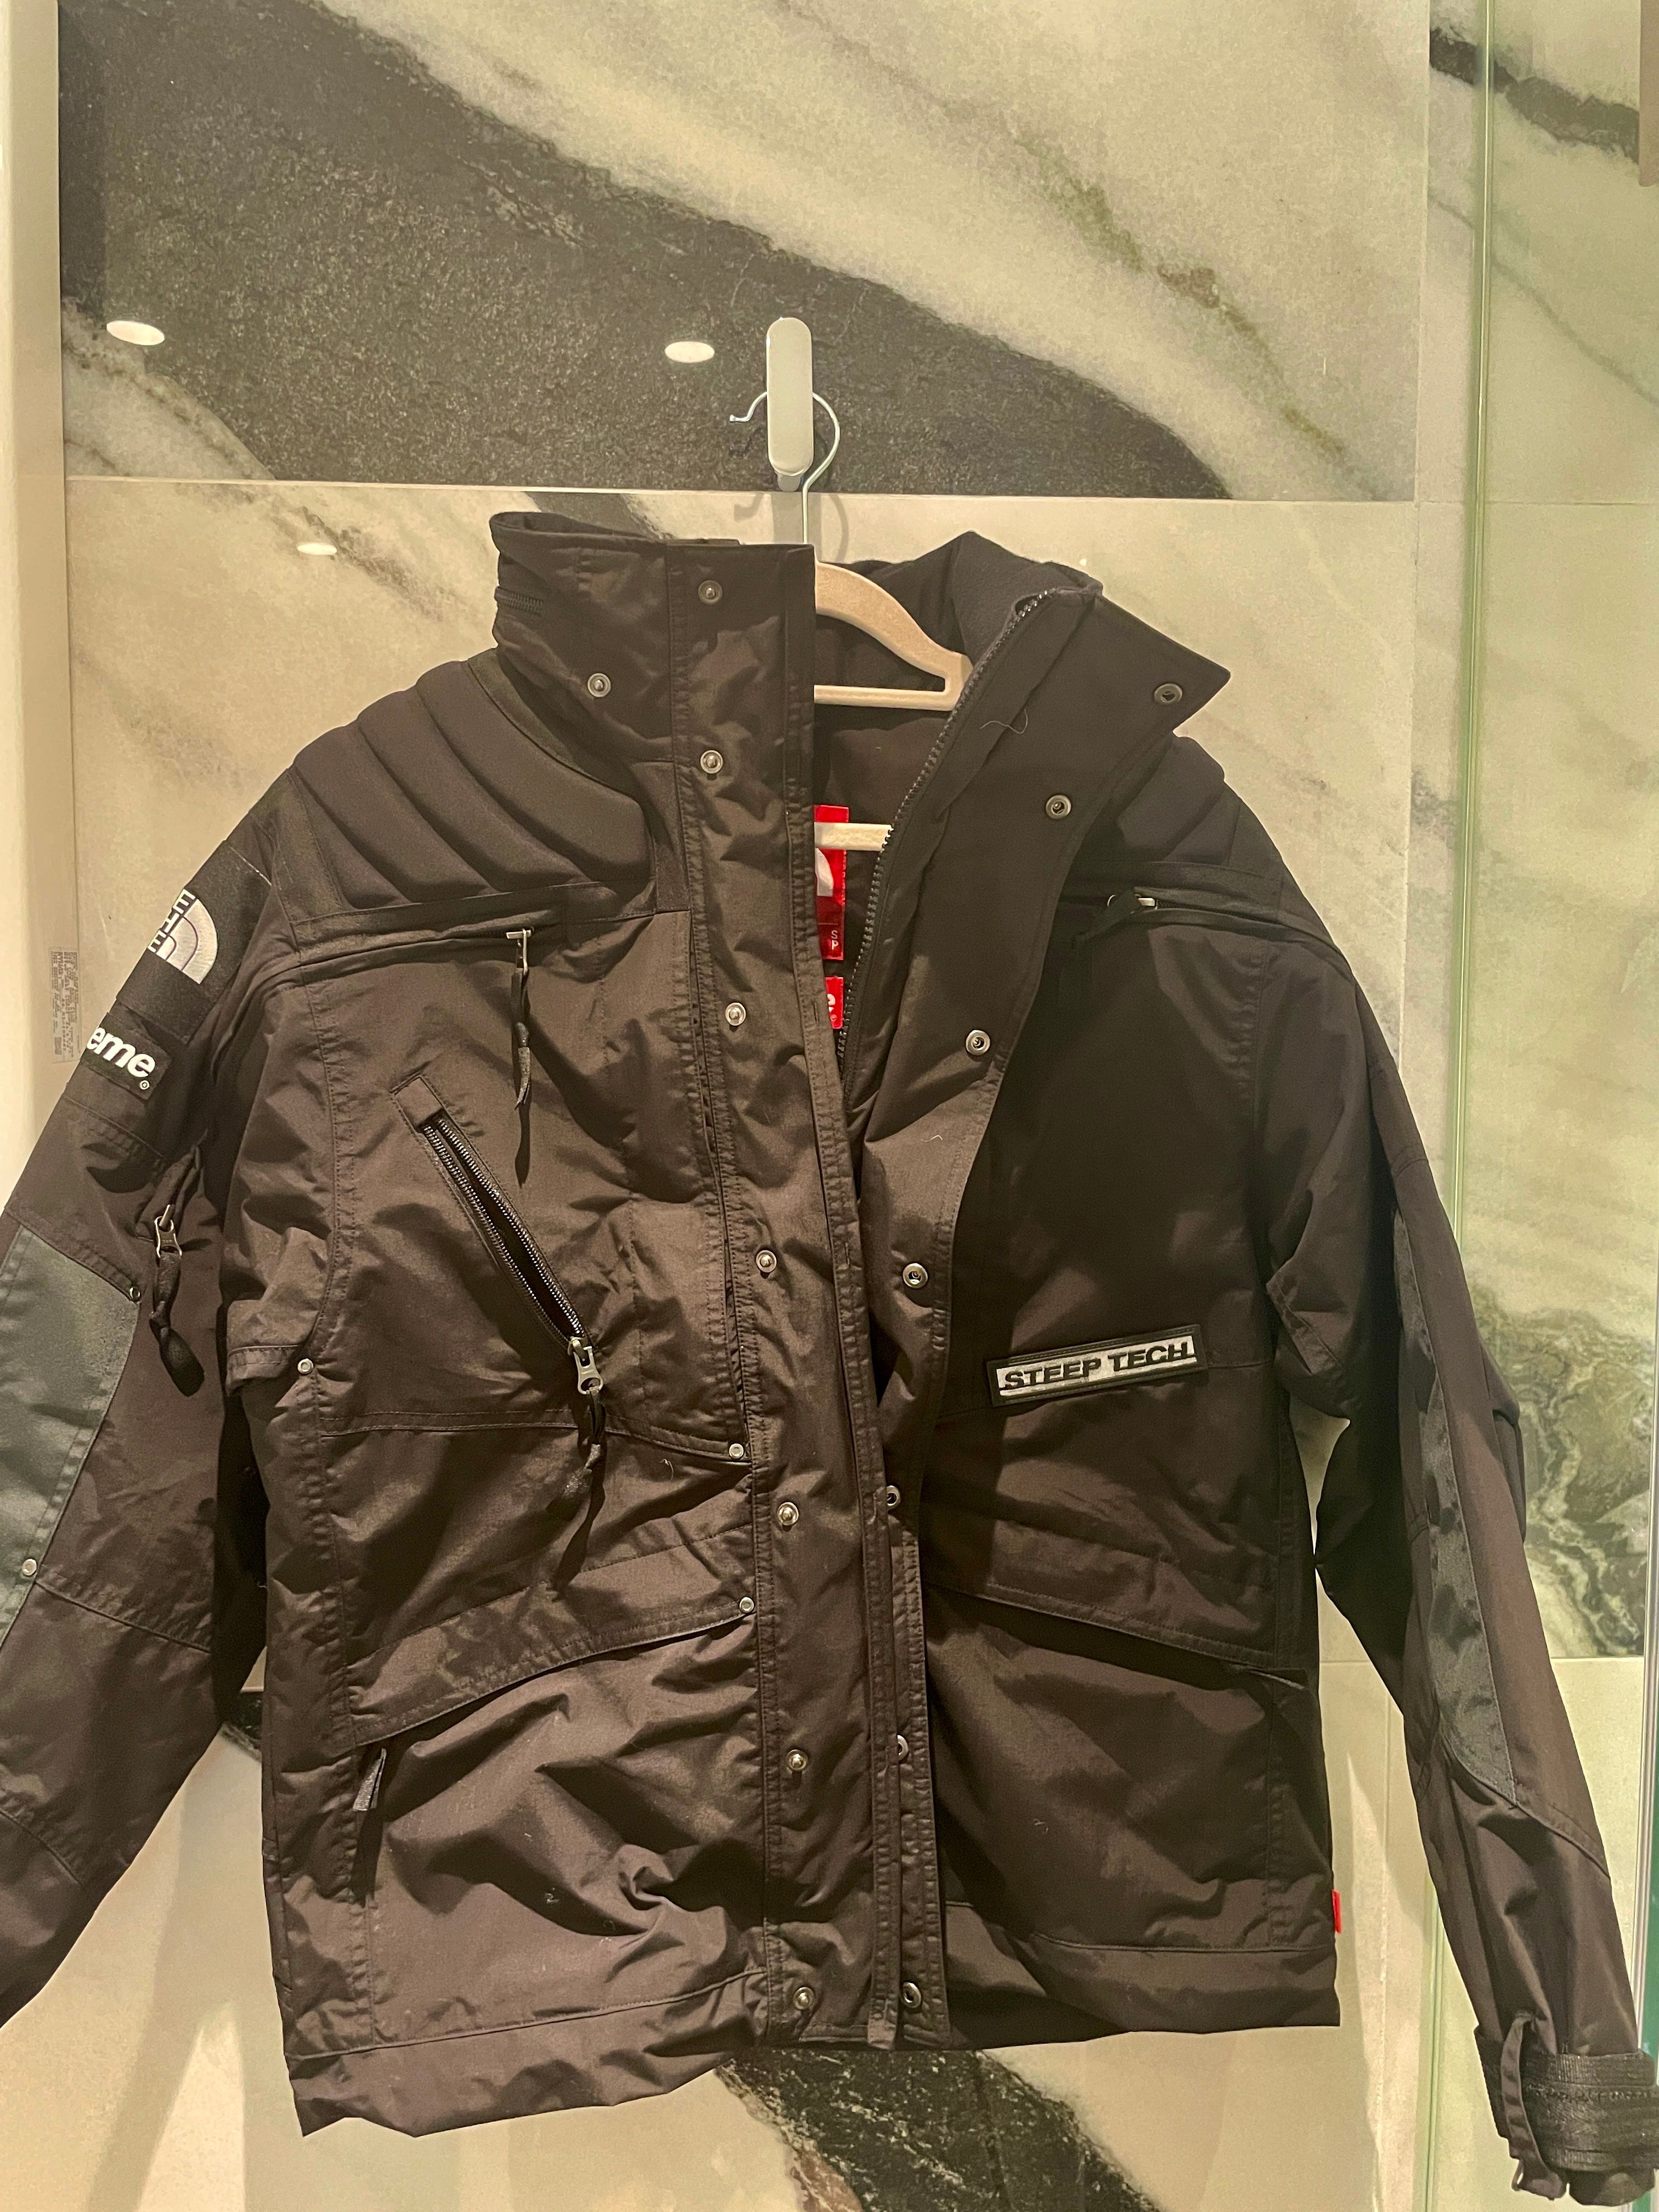 Supreme x The North Face Men's Authenticated Jacket